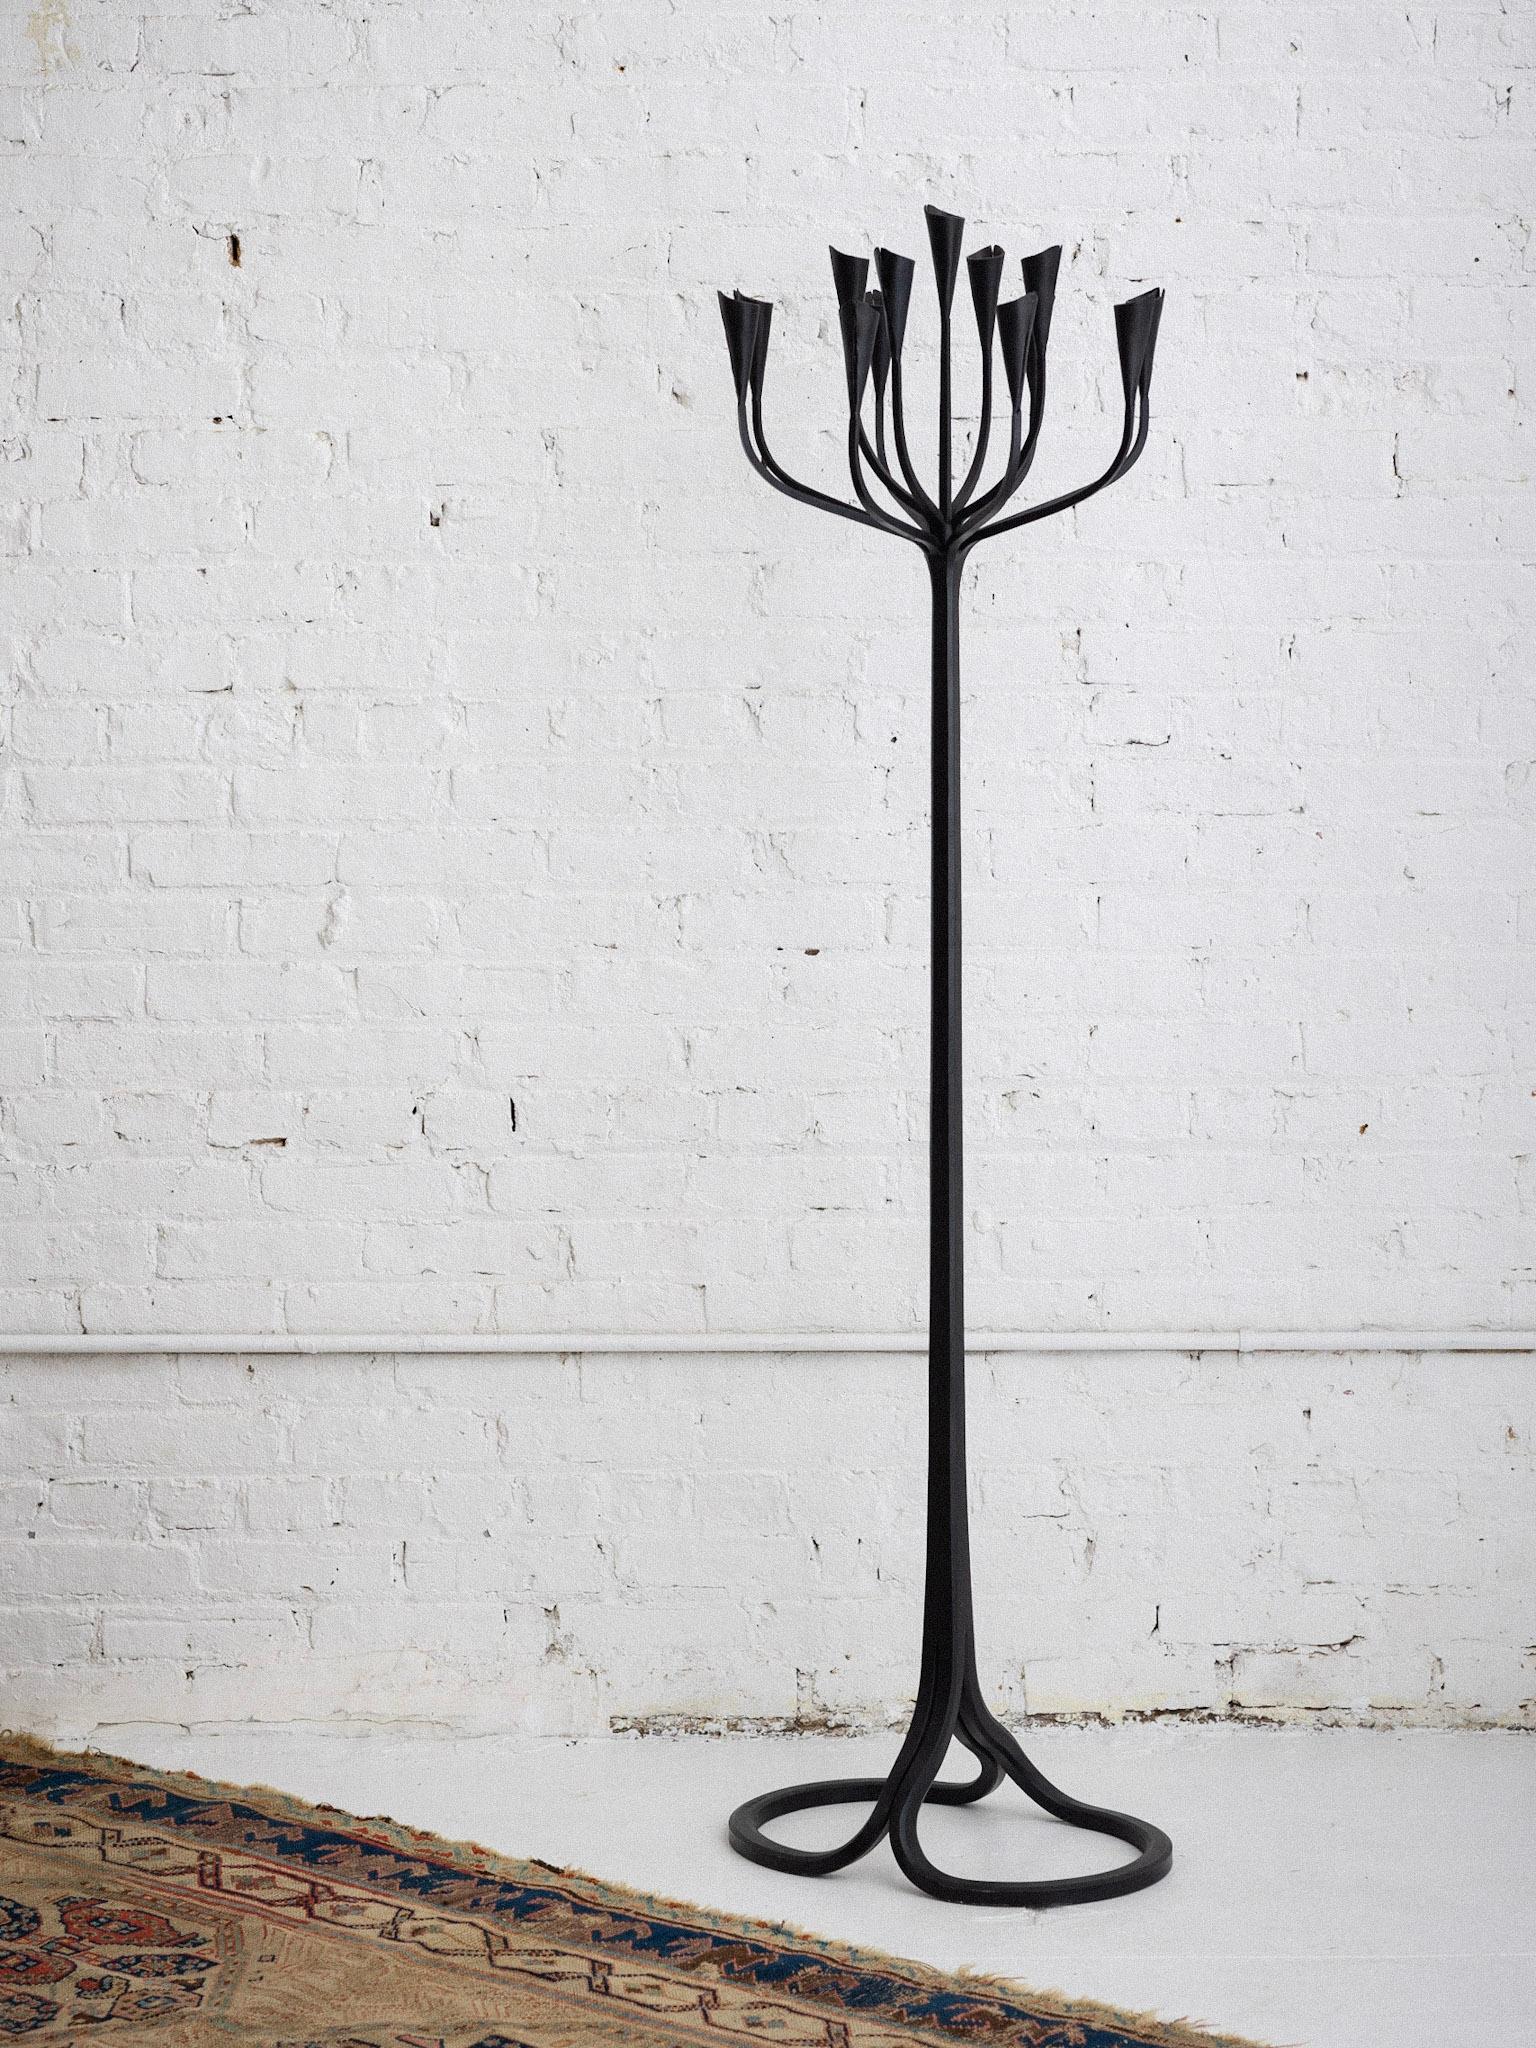 A hand crafted wrought iron candelabra by artist Gregory Litsios. Heavy iron base supports 13 candle inserts for various size tapers. Signed “Gregory Litsios.”